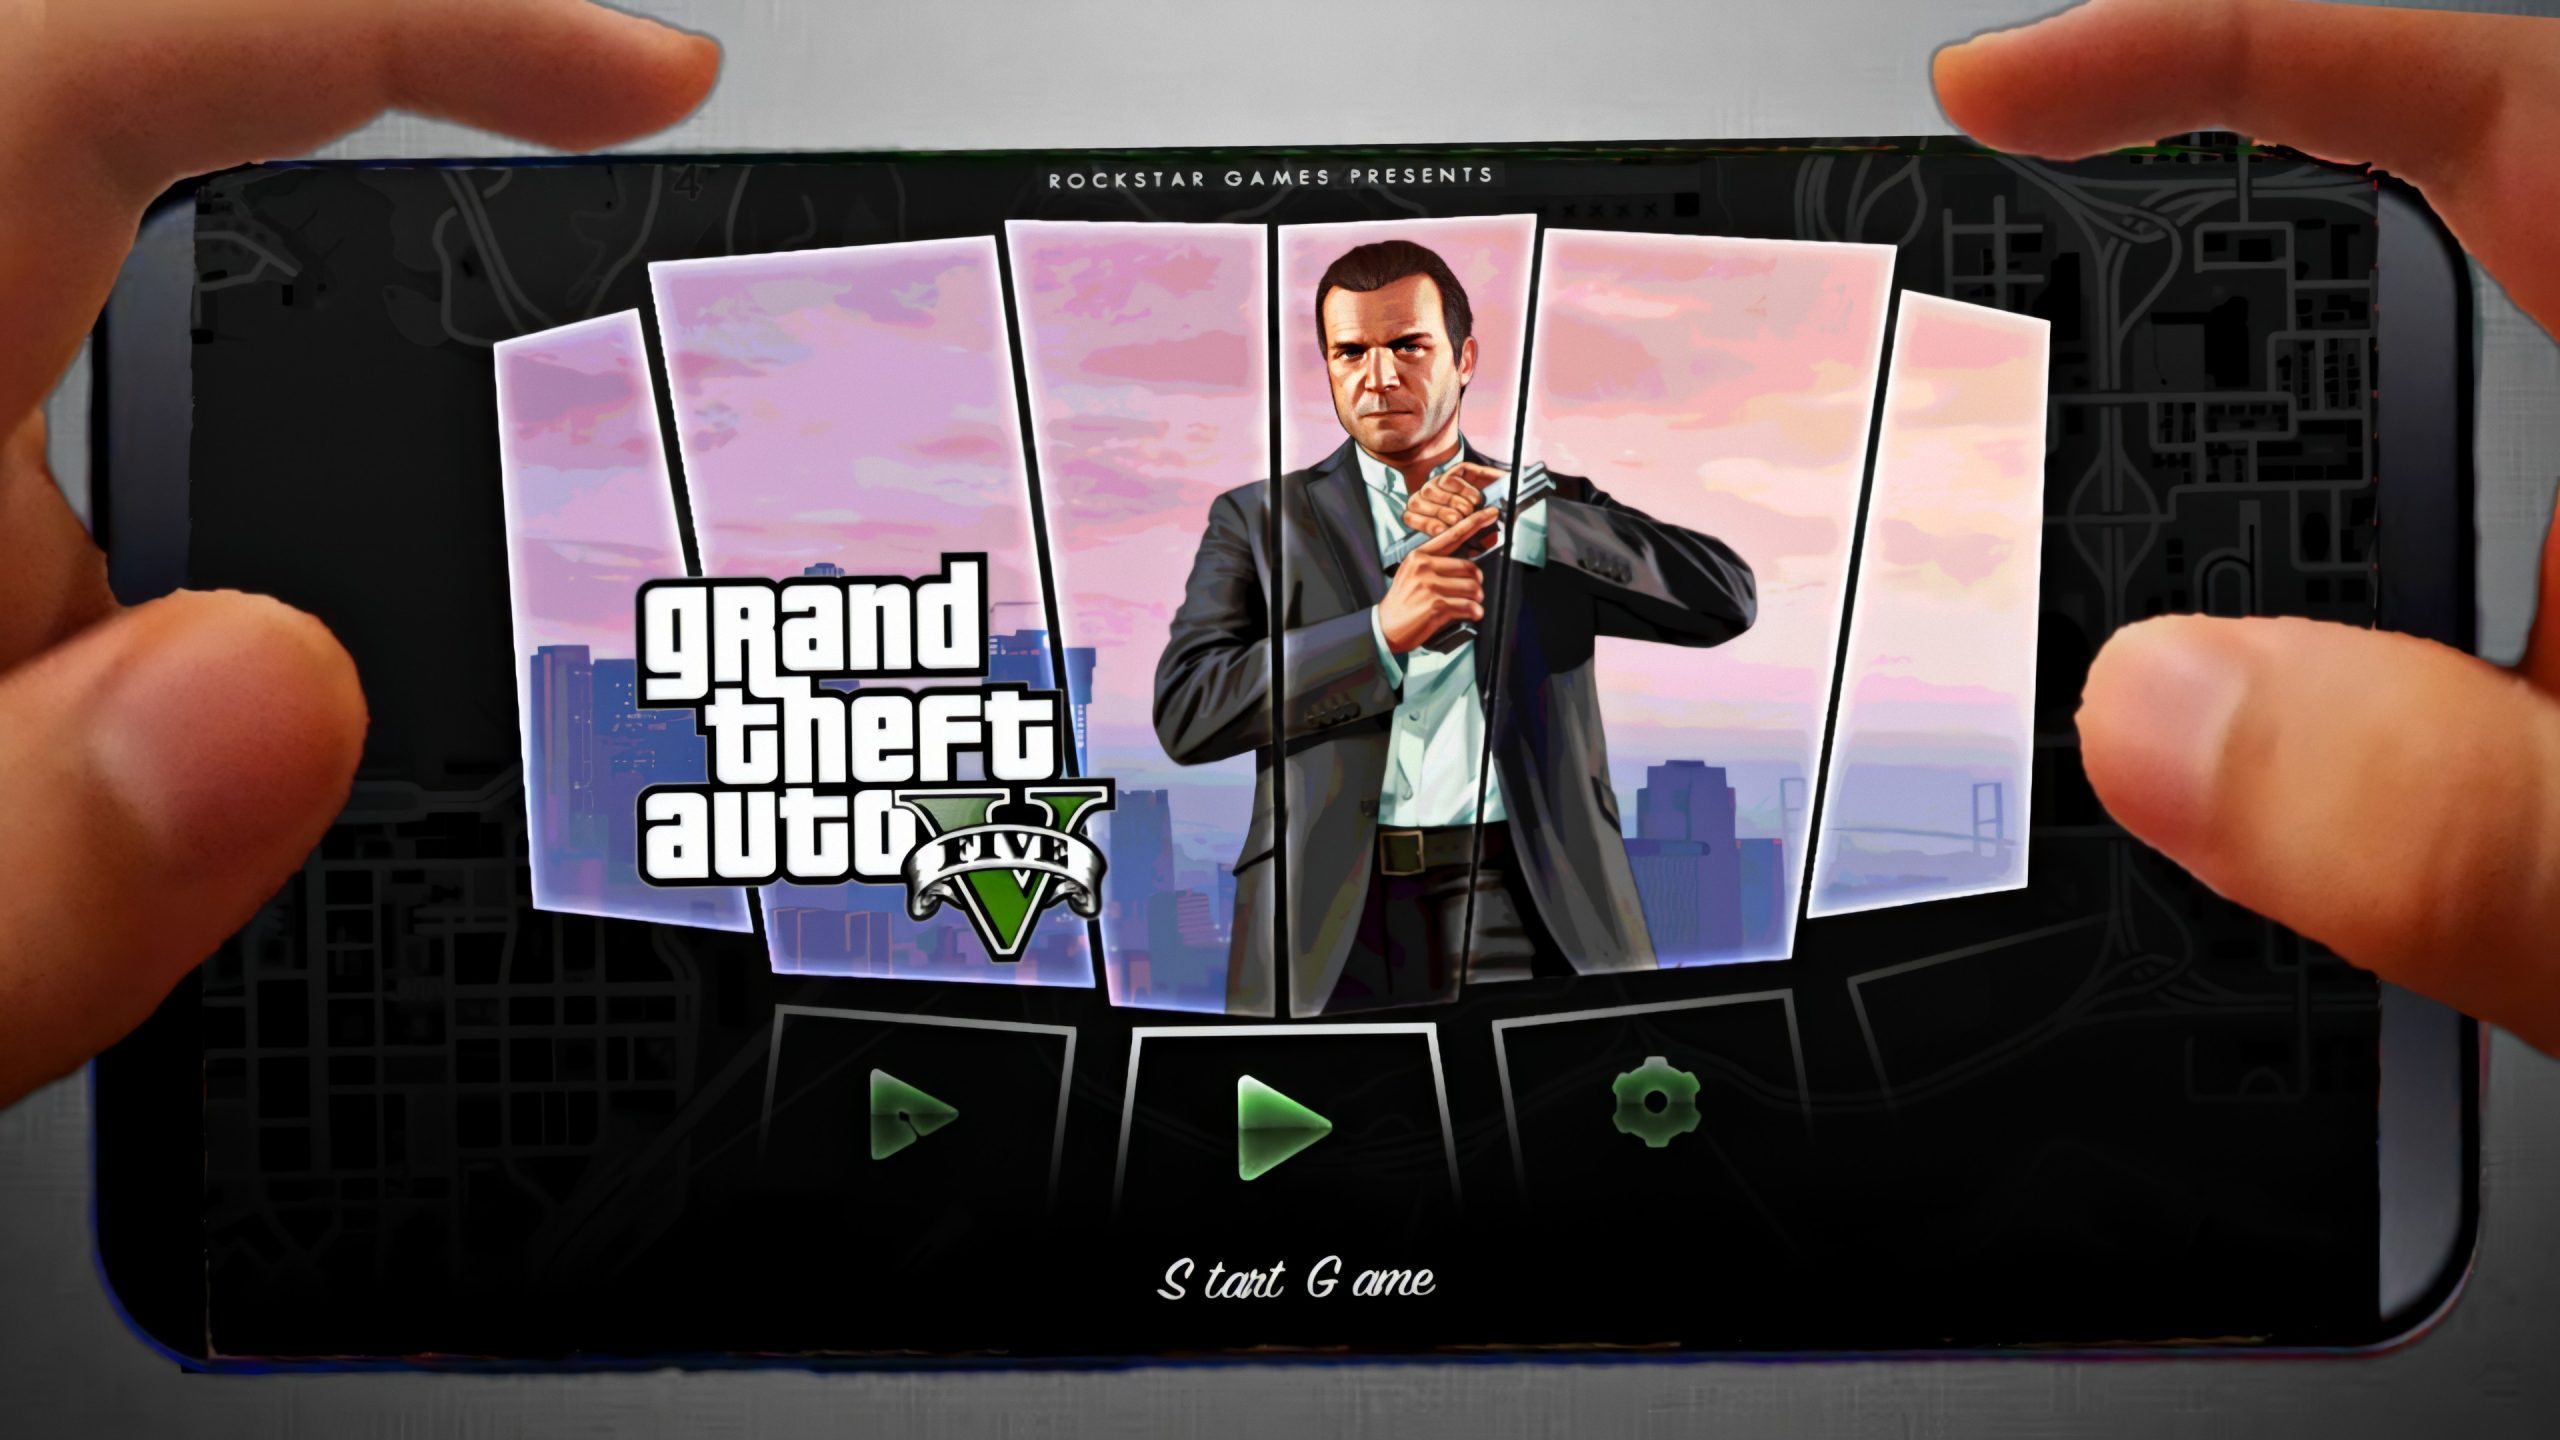 700mb download now gta 5 lite apk data for android